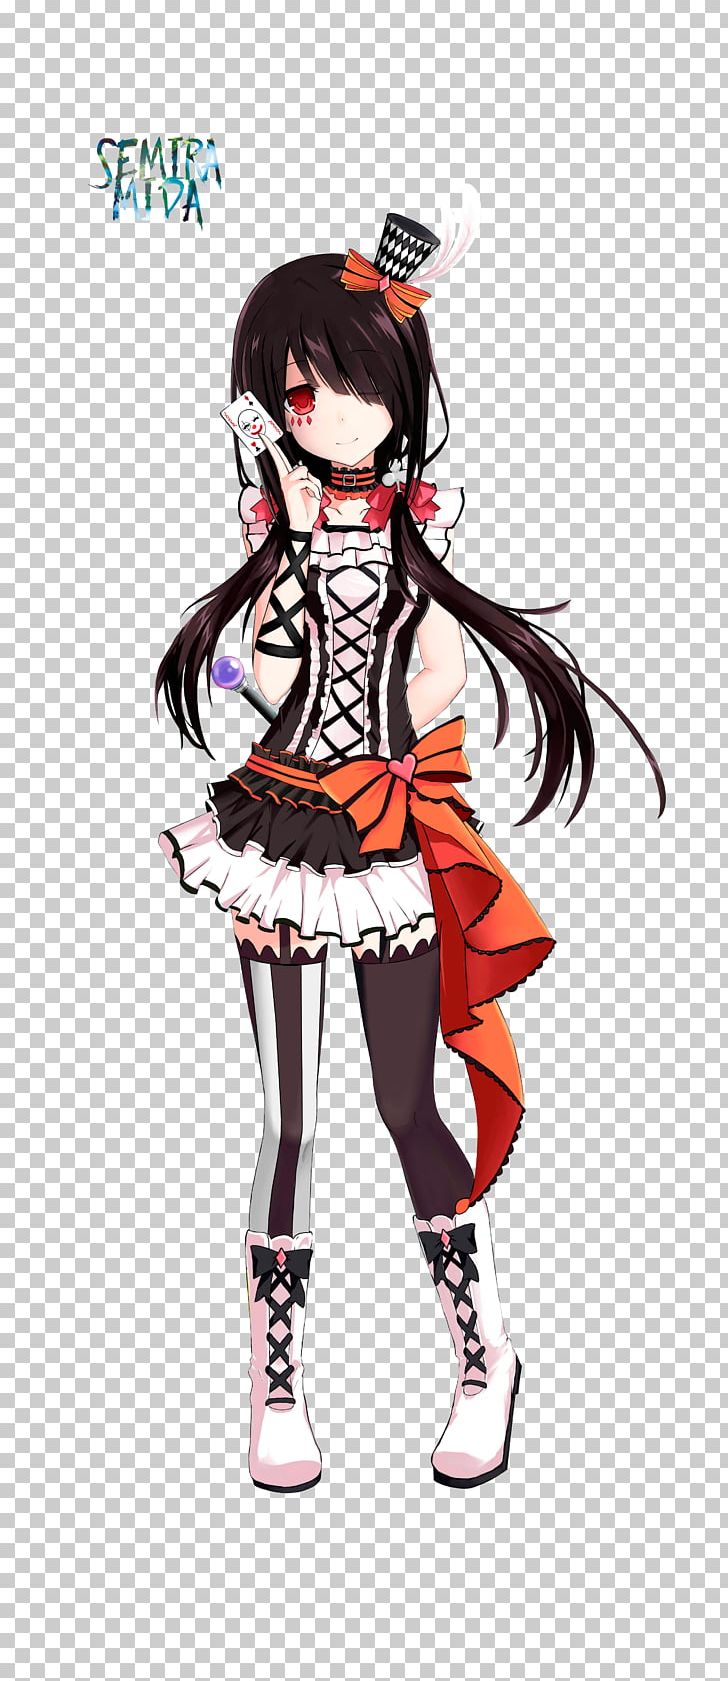 Rendering Date A Live Anime Manga PNG, Clipart, Art, Black Hair, Cartoon, Costume, Costume Design Free PNG Download